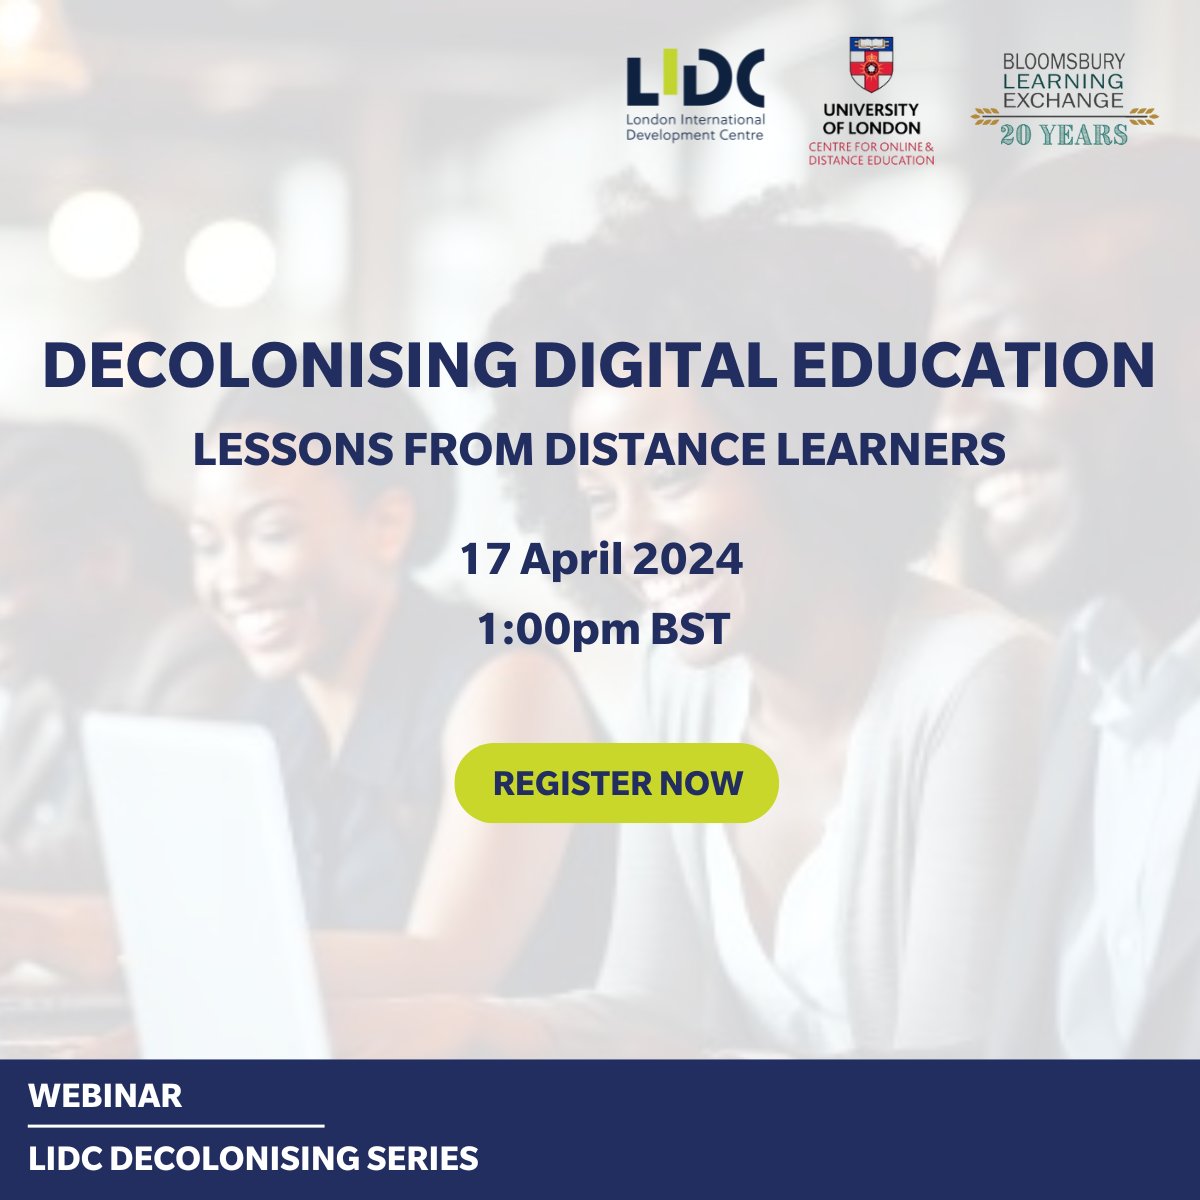 Did you know that global education remains imbued with colonial assumptions? 📅 17 April we will explore decolonising digital education from the perspectives of distance learners across Africa, Asia & LatAm with @ble_tweets & @CODE_UOL. ➡️Register now: ow.ly/YyqA50Rc6fE